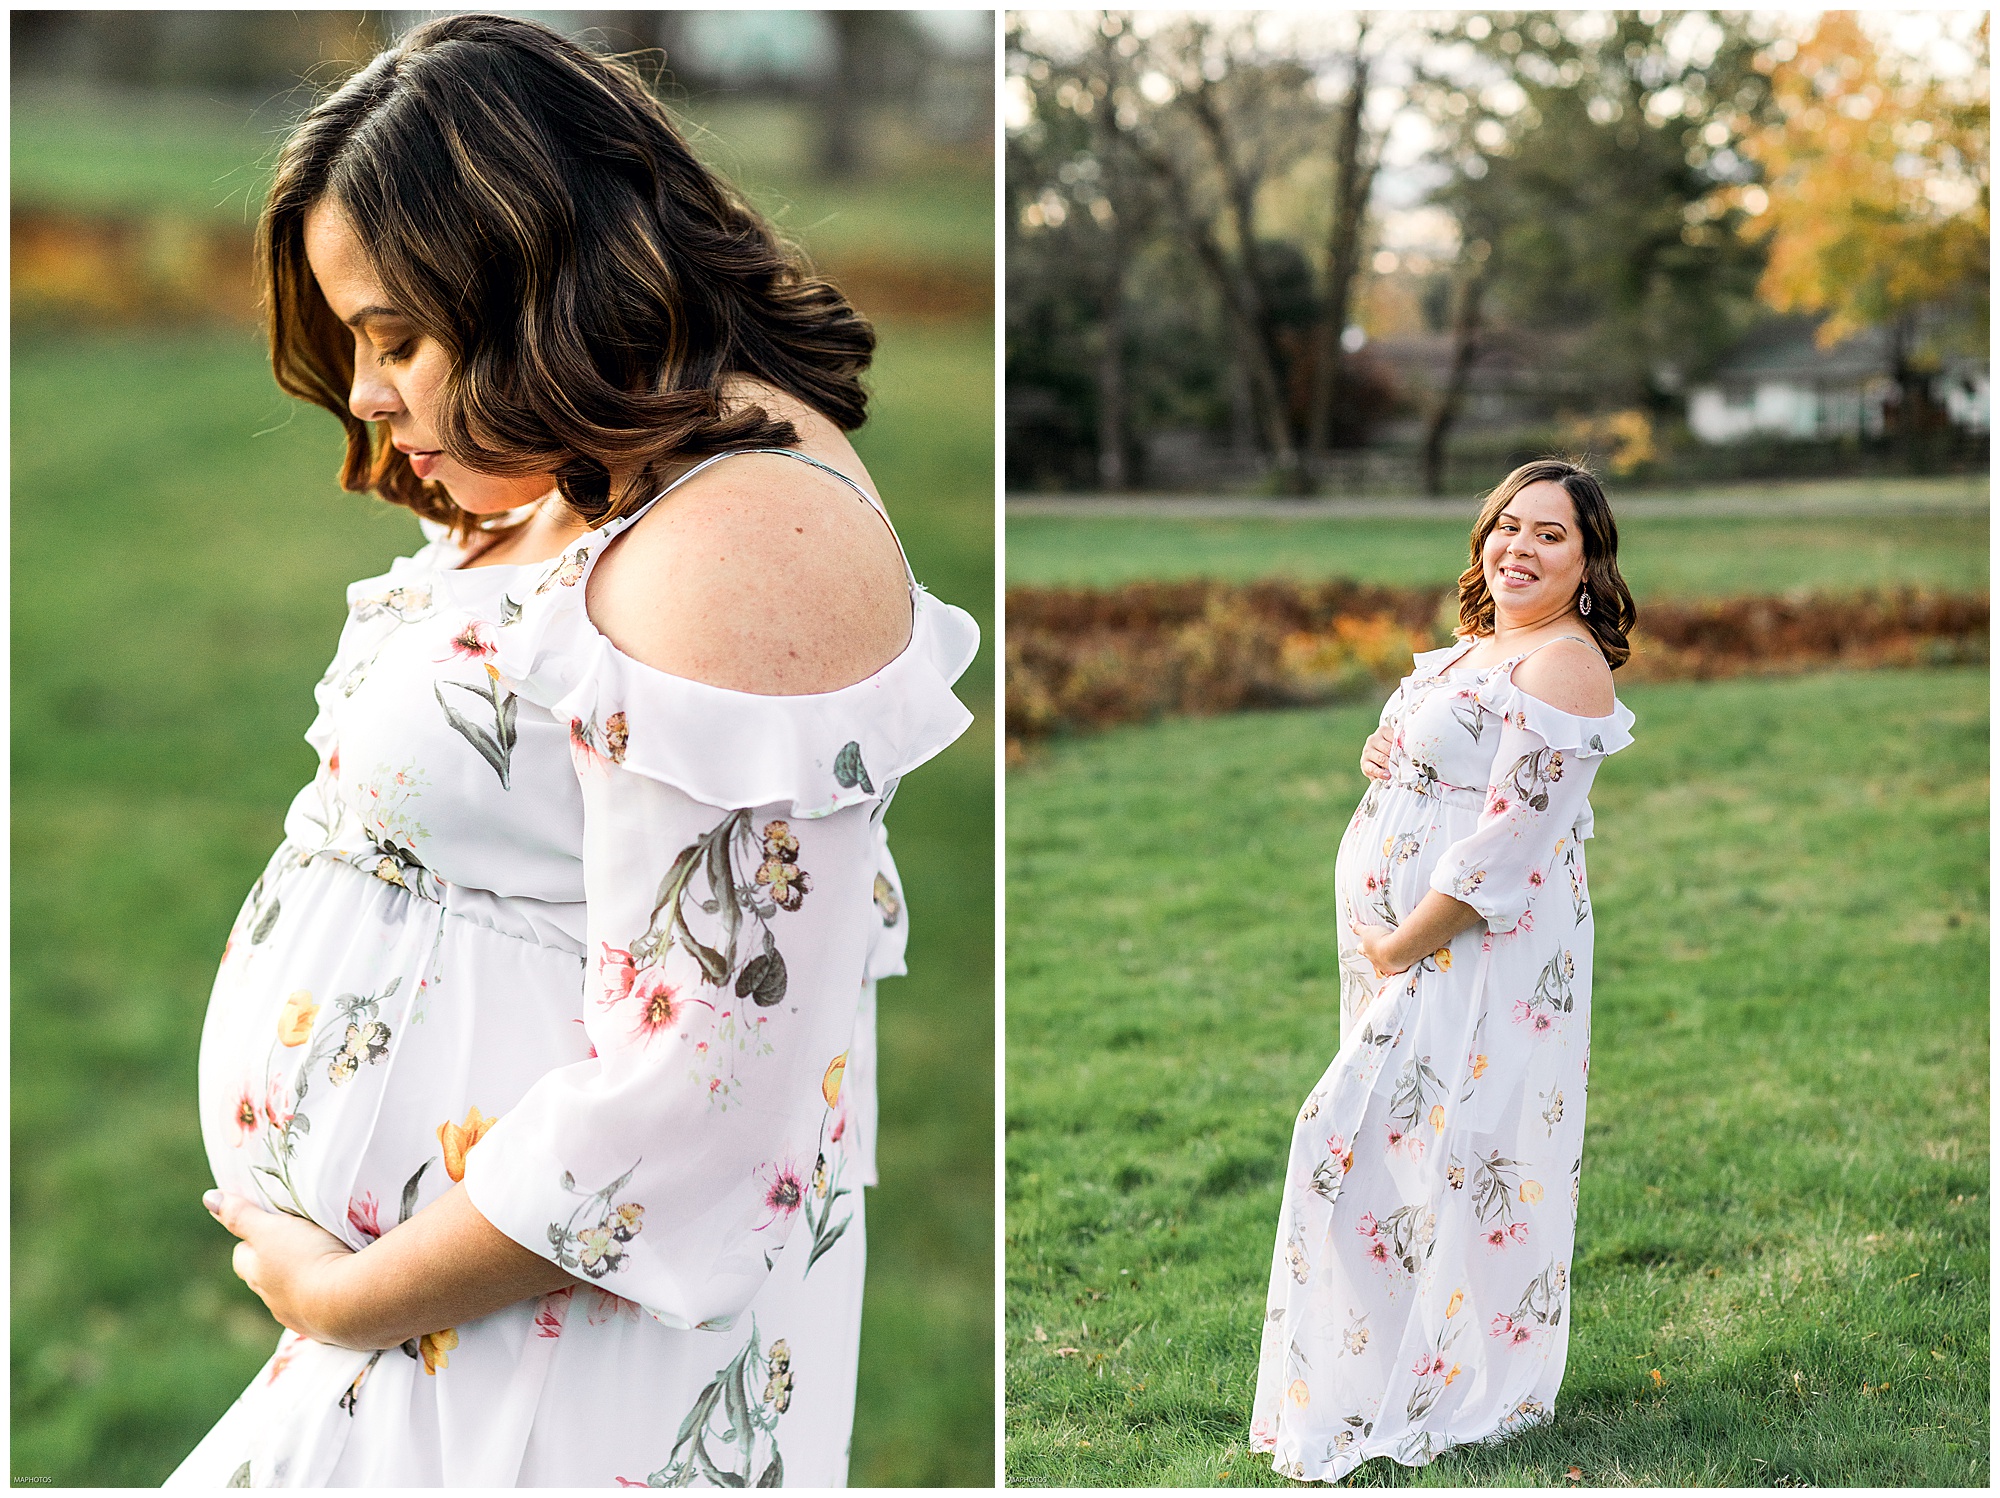 A Family and Maternity Session at Strawberry Park in Moorestown, NJ